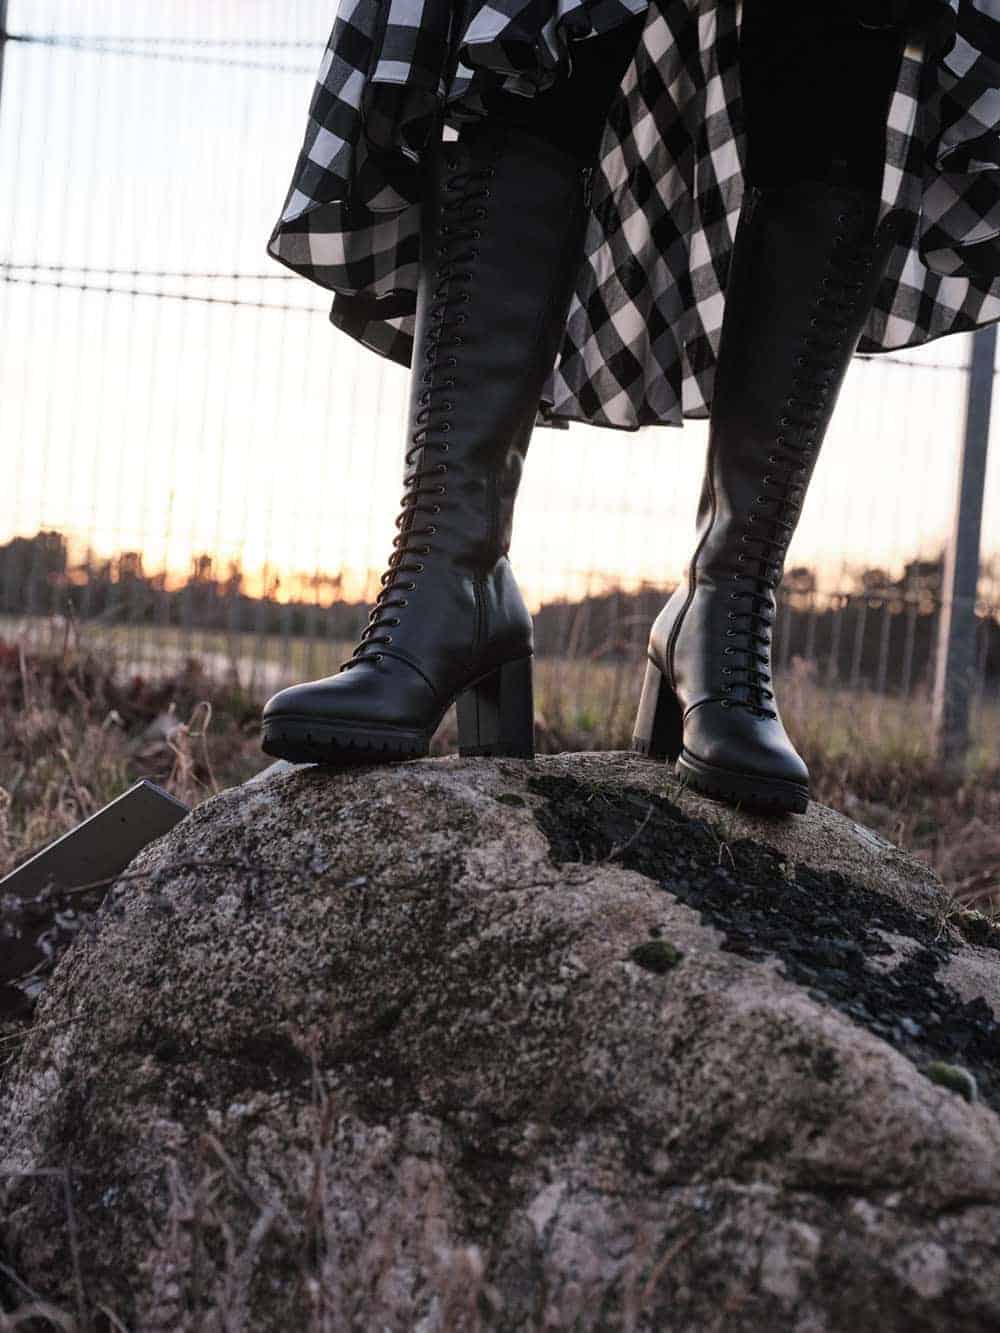 The legs and feet of someone wearing lace up knee high boots, standing on a rock